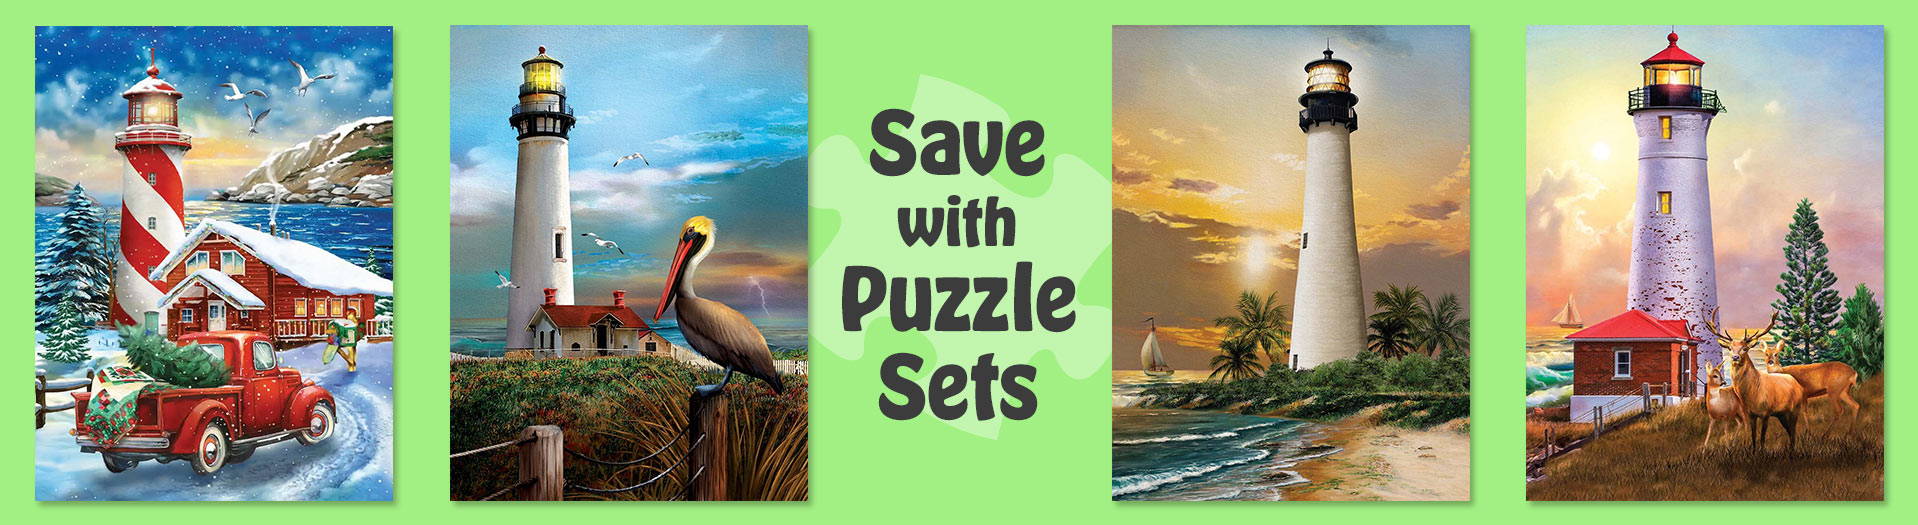 Save with Puzzle Sets